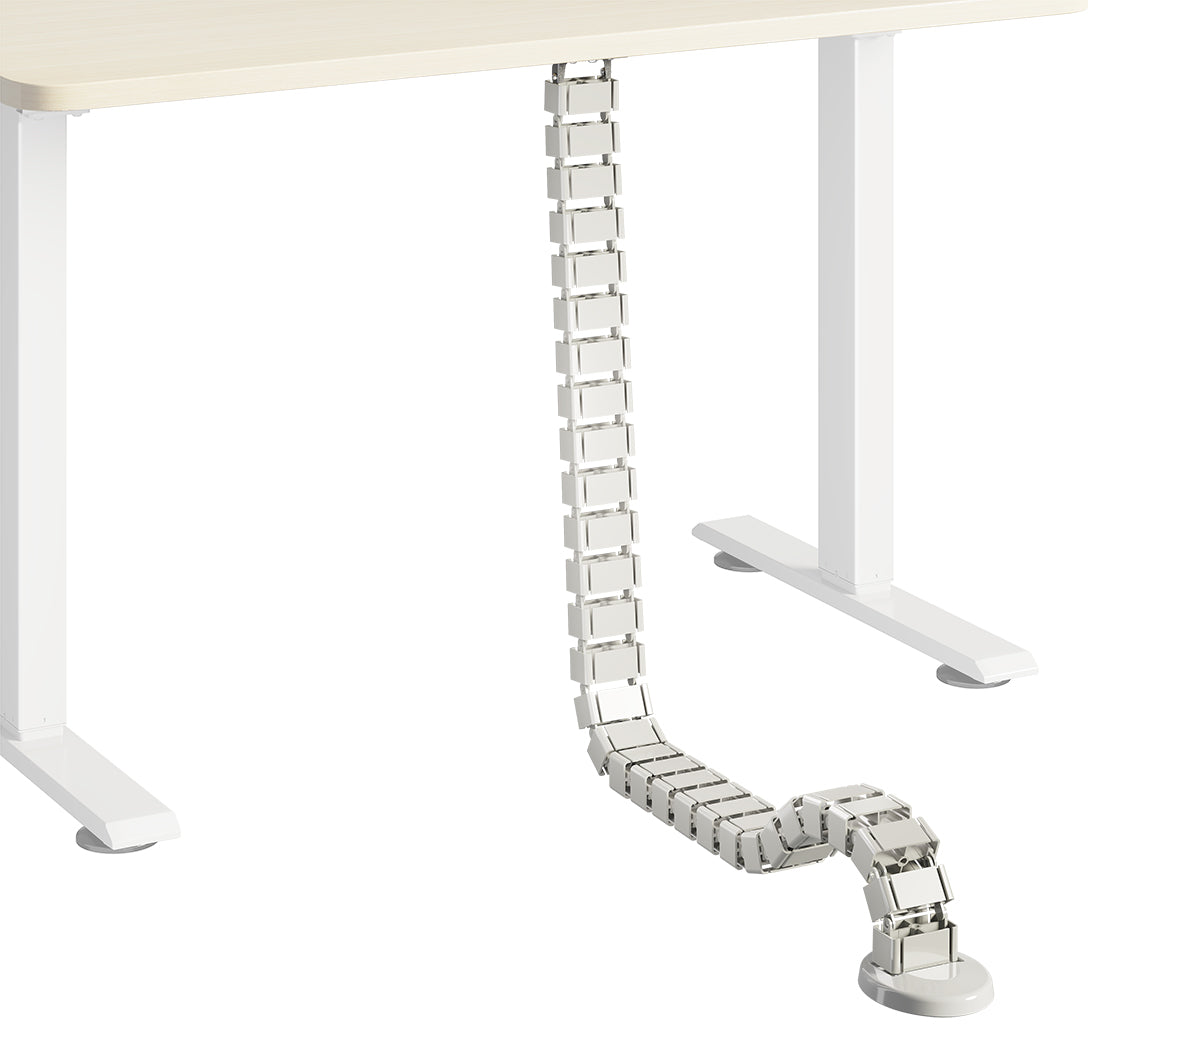 Maidesite 51 inch under-desk cable spine, the best cable management solution